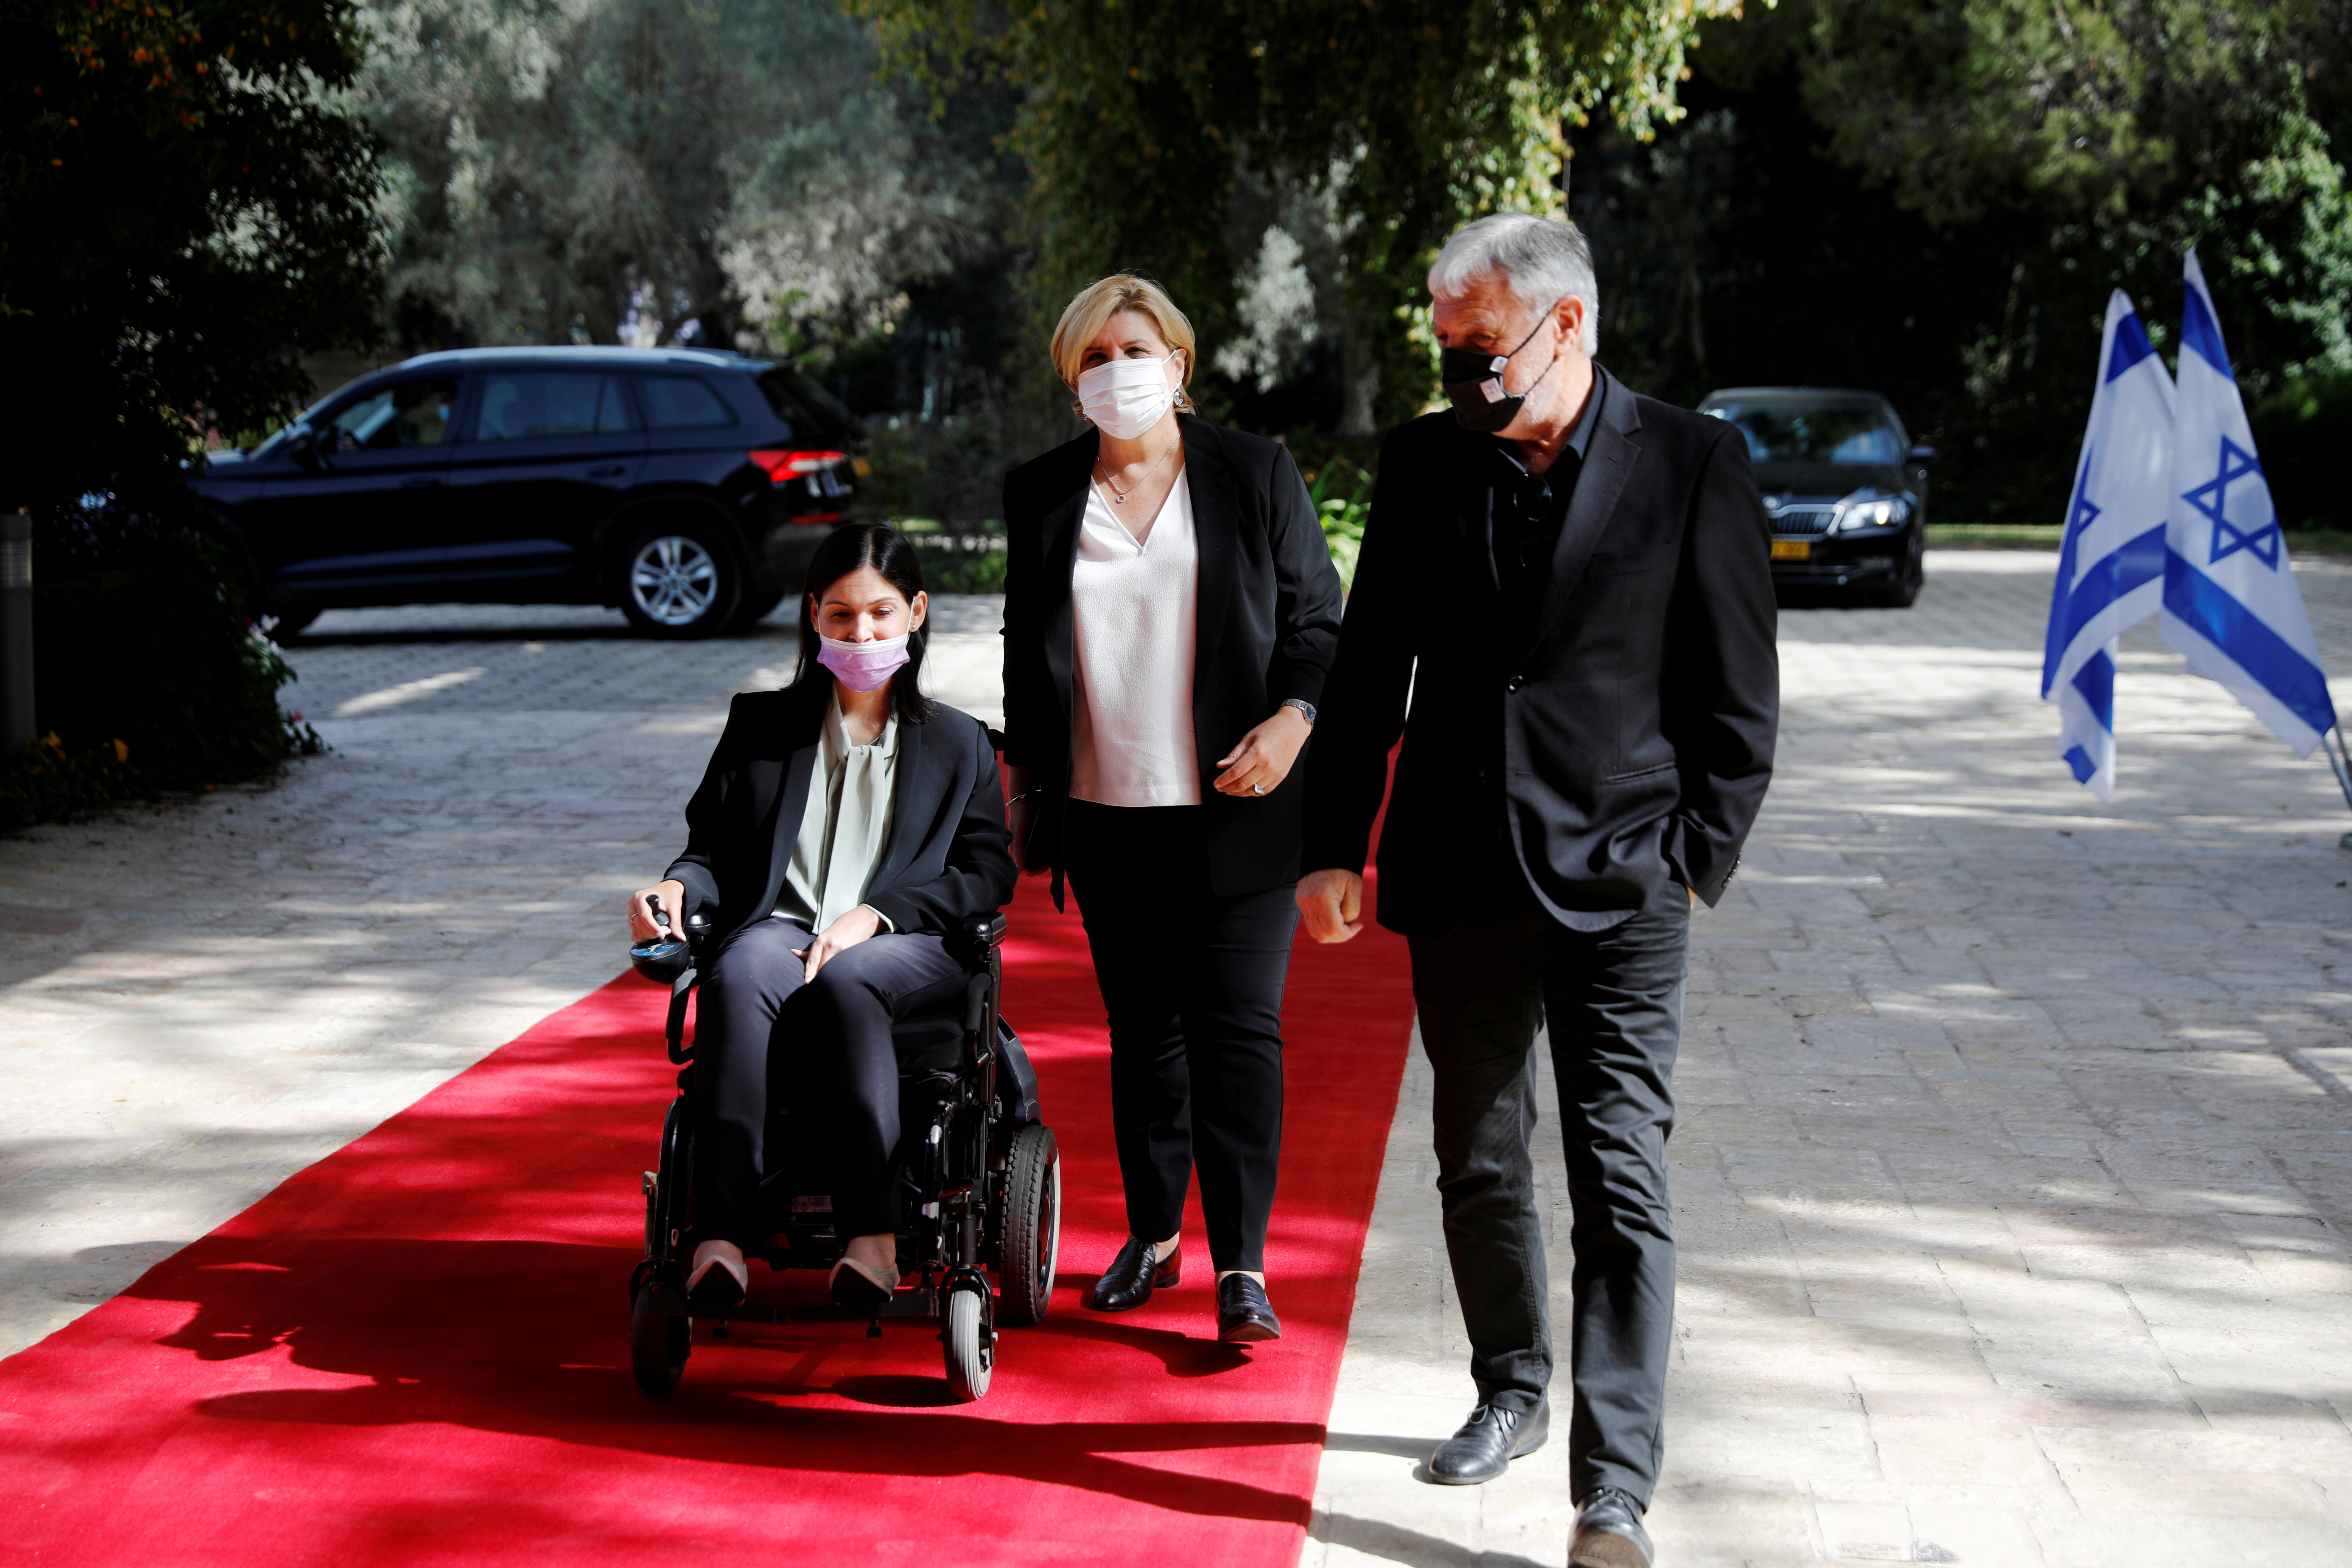 Karine Elharrar, Orna Barbivai and Meir Cohen from the Yesh Atid party arrive for consultations on the formation of a coalition government, at the President's residence in Jerusalem April 5, 2021. REUTERS/Amir Cohen/File Photo